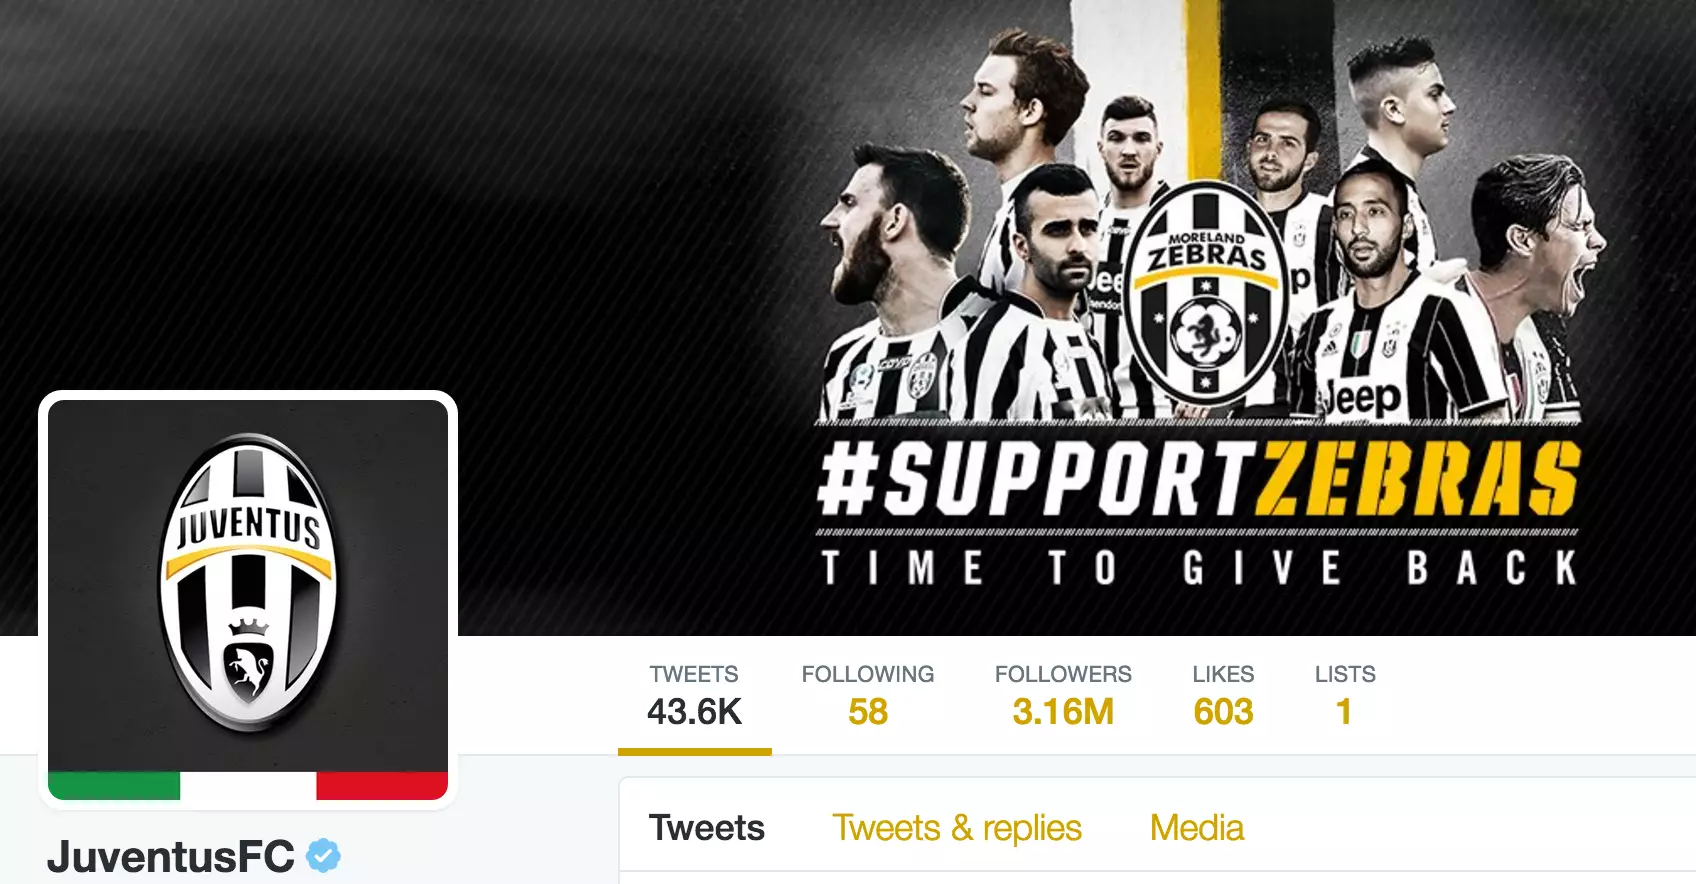 People Think Pogba To Man United Is A Done Deal After Juventus' Social Media Activity 